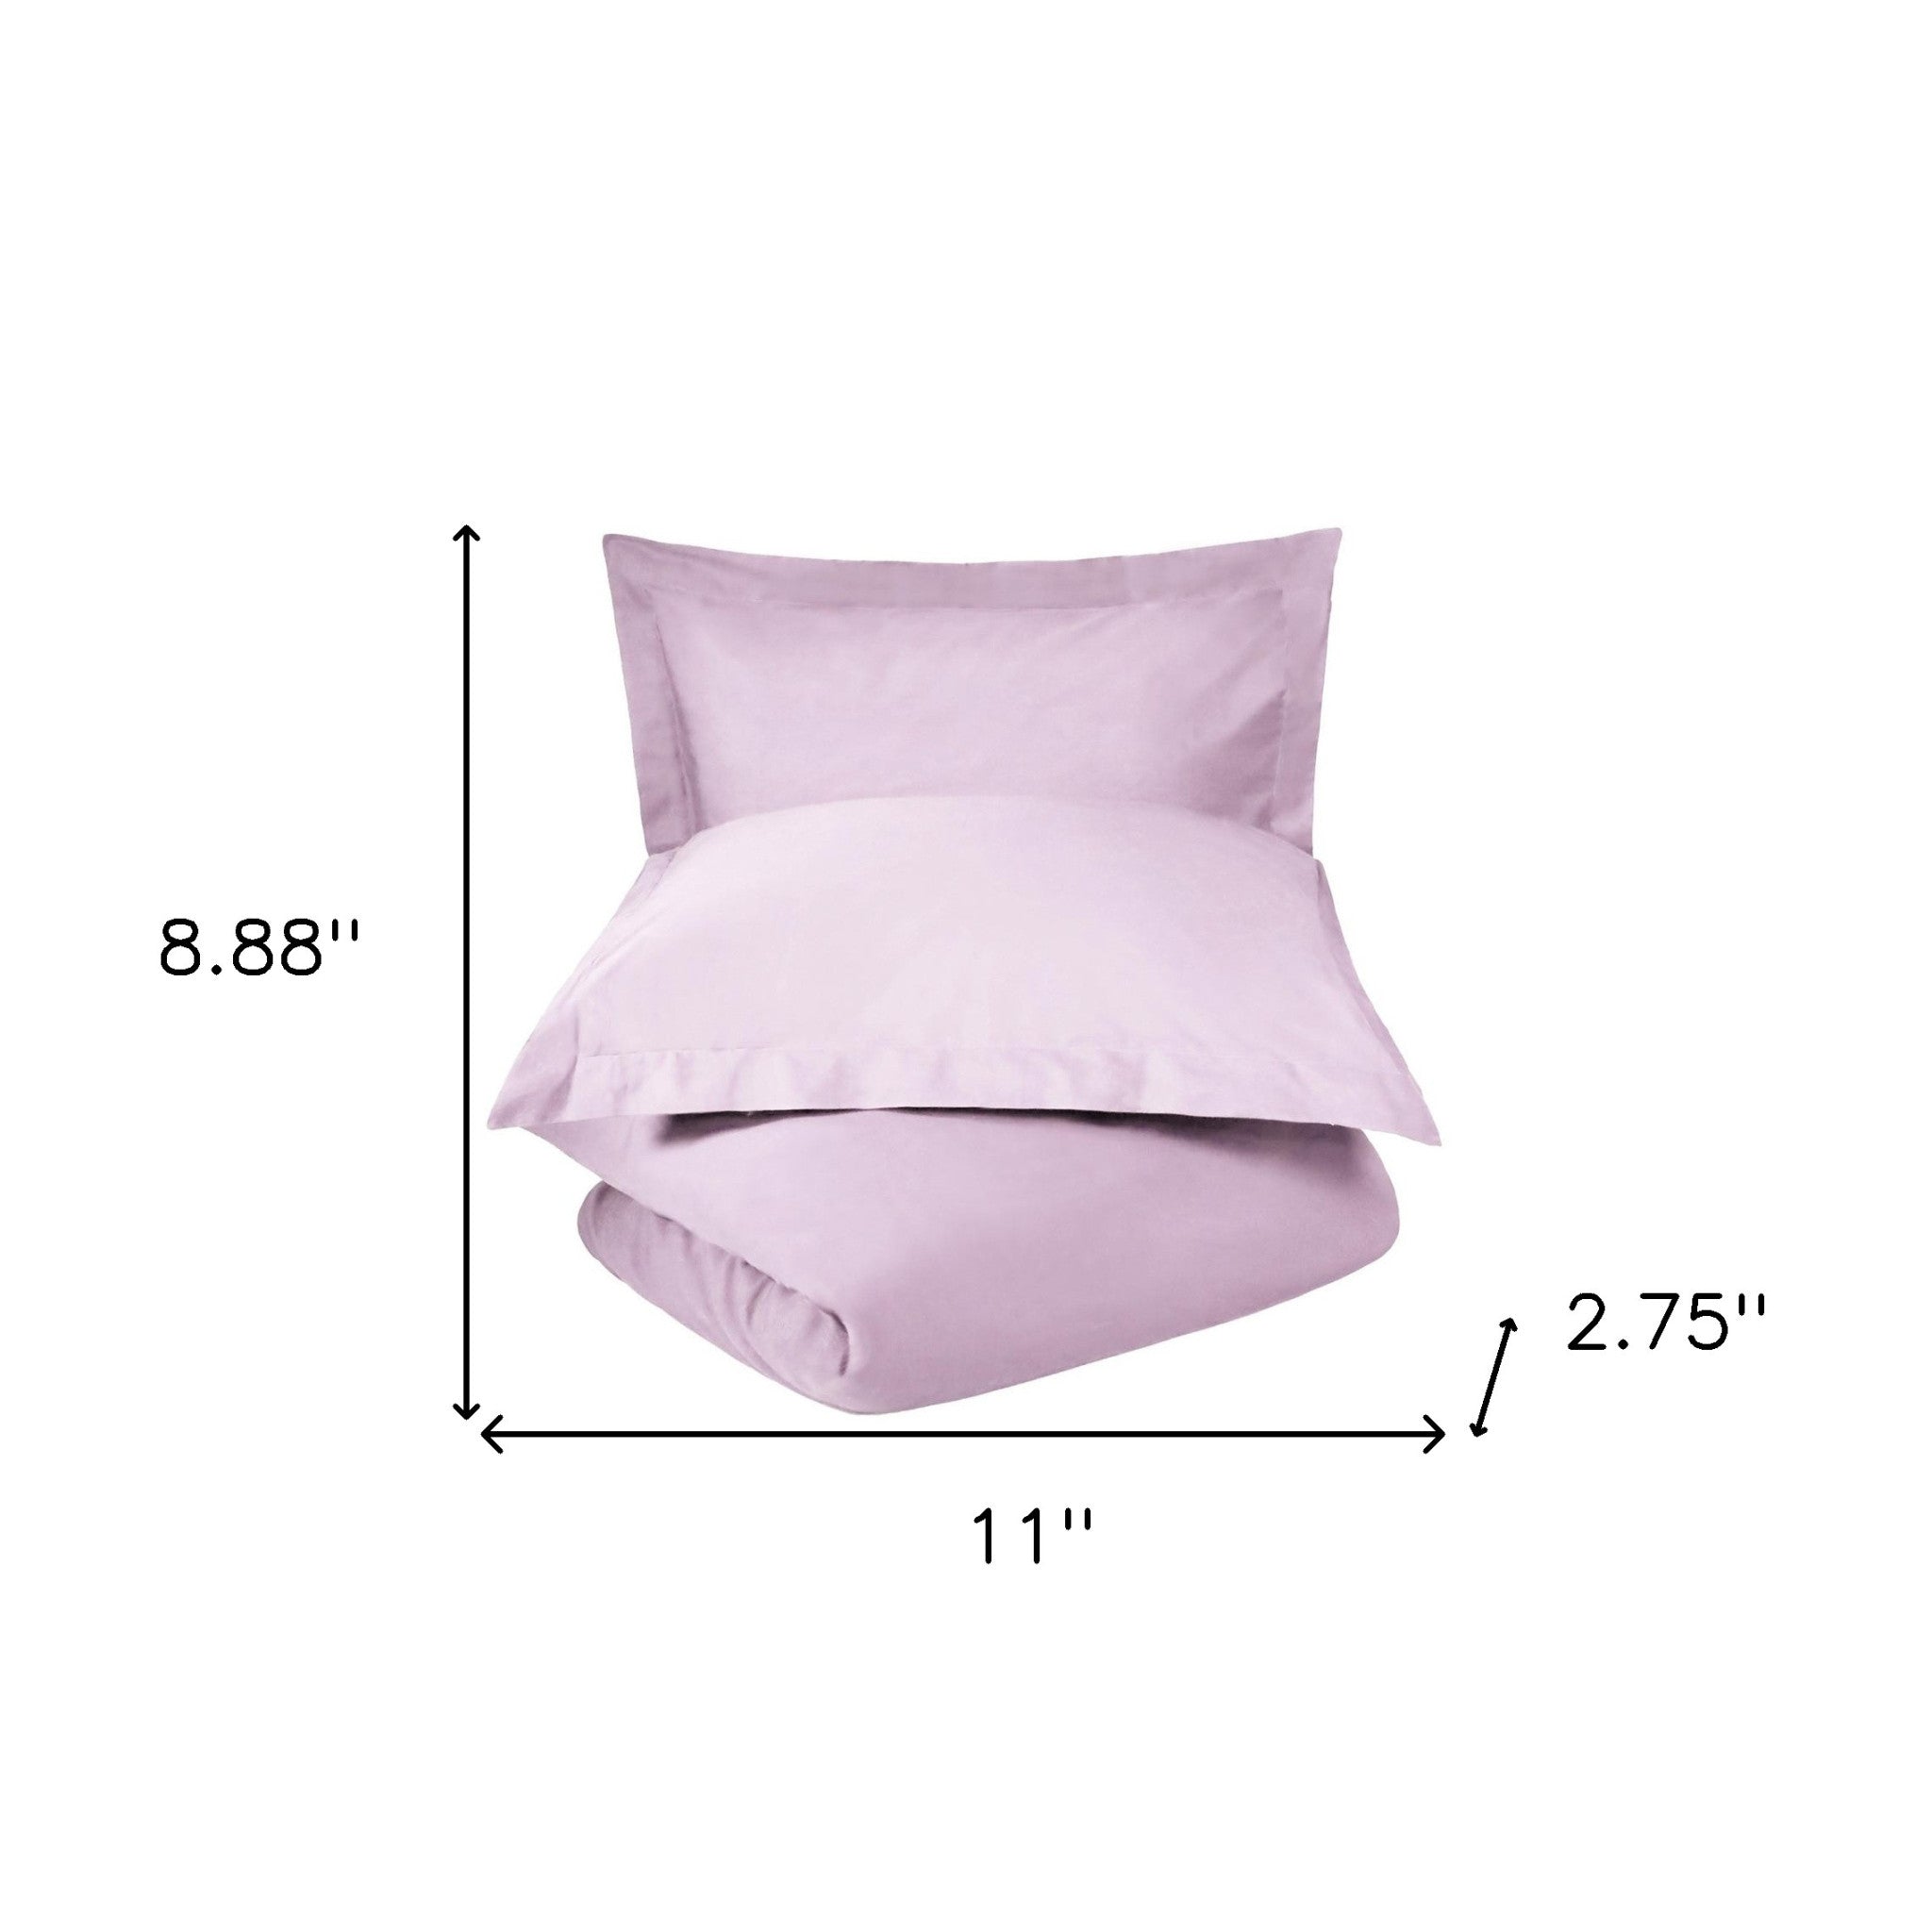 Lilac Twin 100% Cotton 300 Thread Count Washable Duvet Cover Set